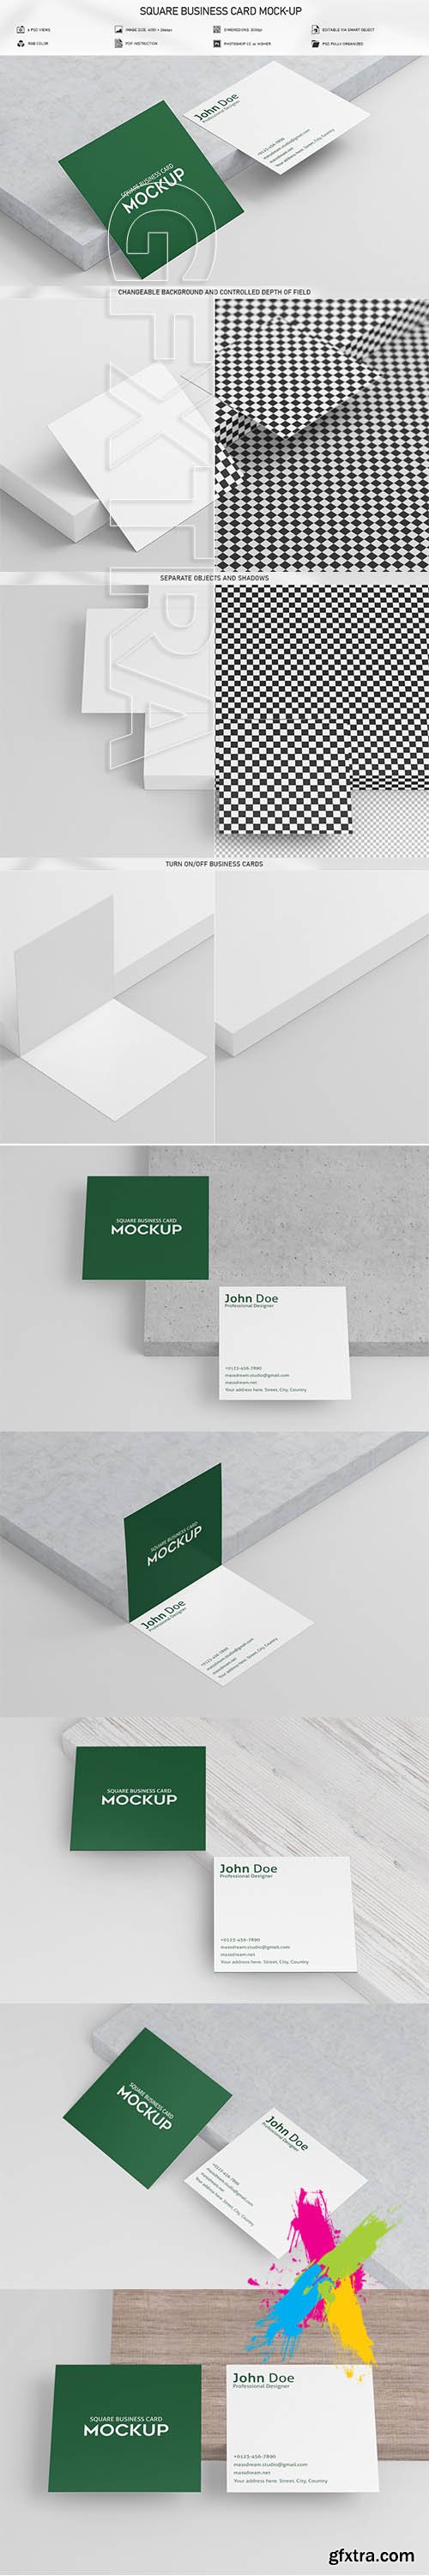 CreativeMarket - Square Business Card Mock-Up 5832510